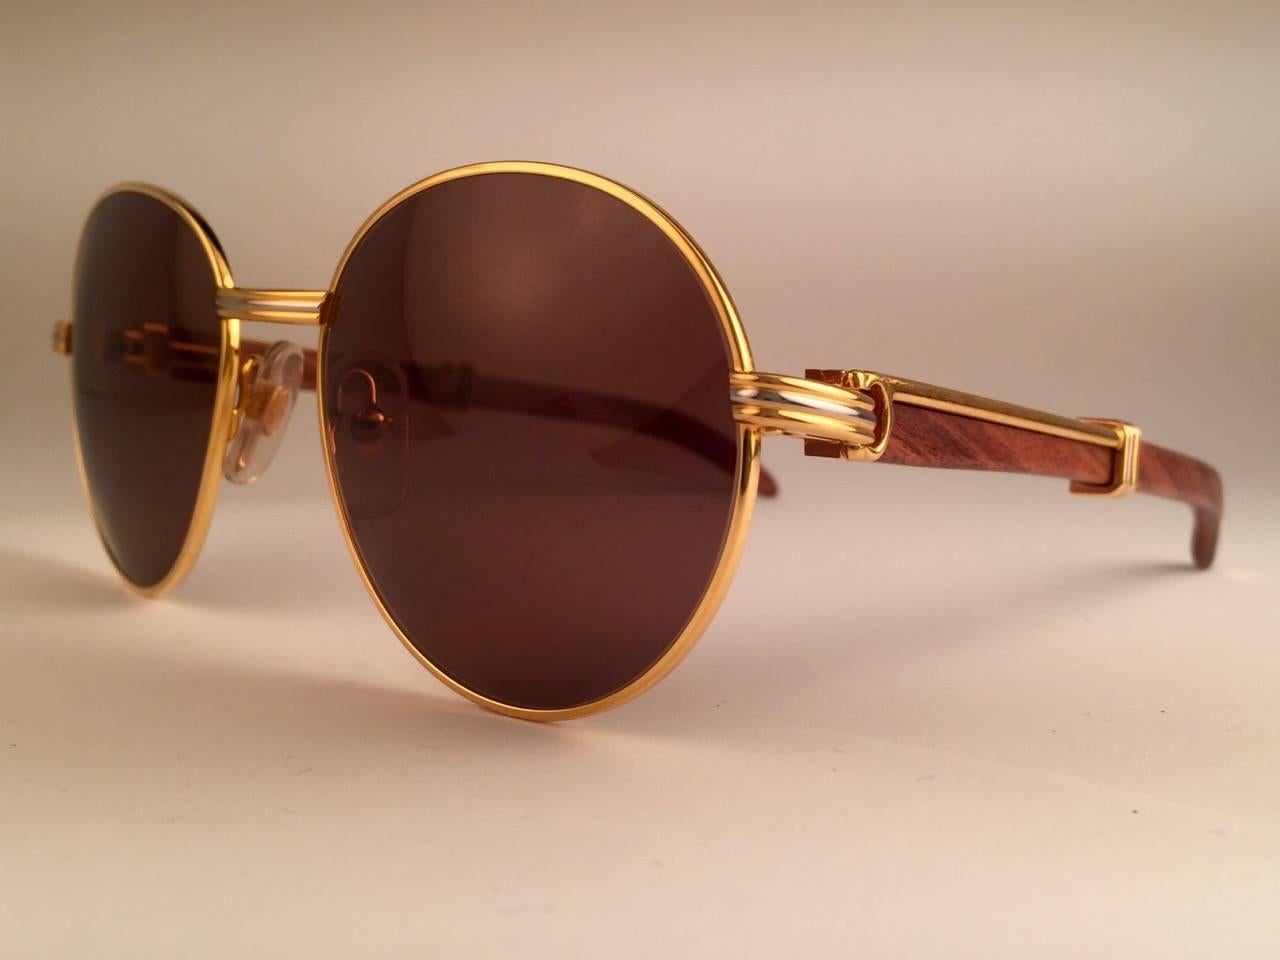 New original 1990 Cartier Bagatelle Wood Sunglasses from the coveted Precious Wood series with palisander wood temples and honey brown (uv protection) lenses. 
The frame has the front and sides in yellow and white gold. 
All hallmarks. gold Cartier